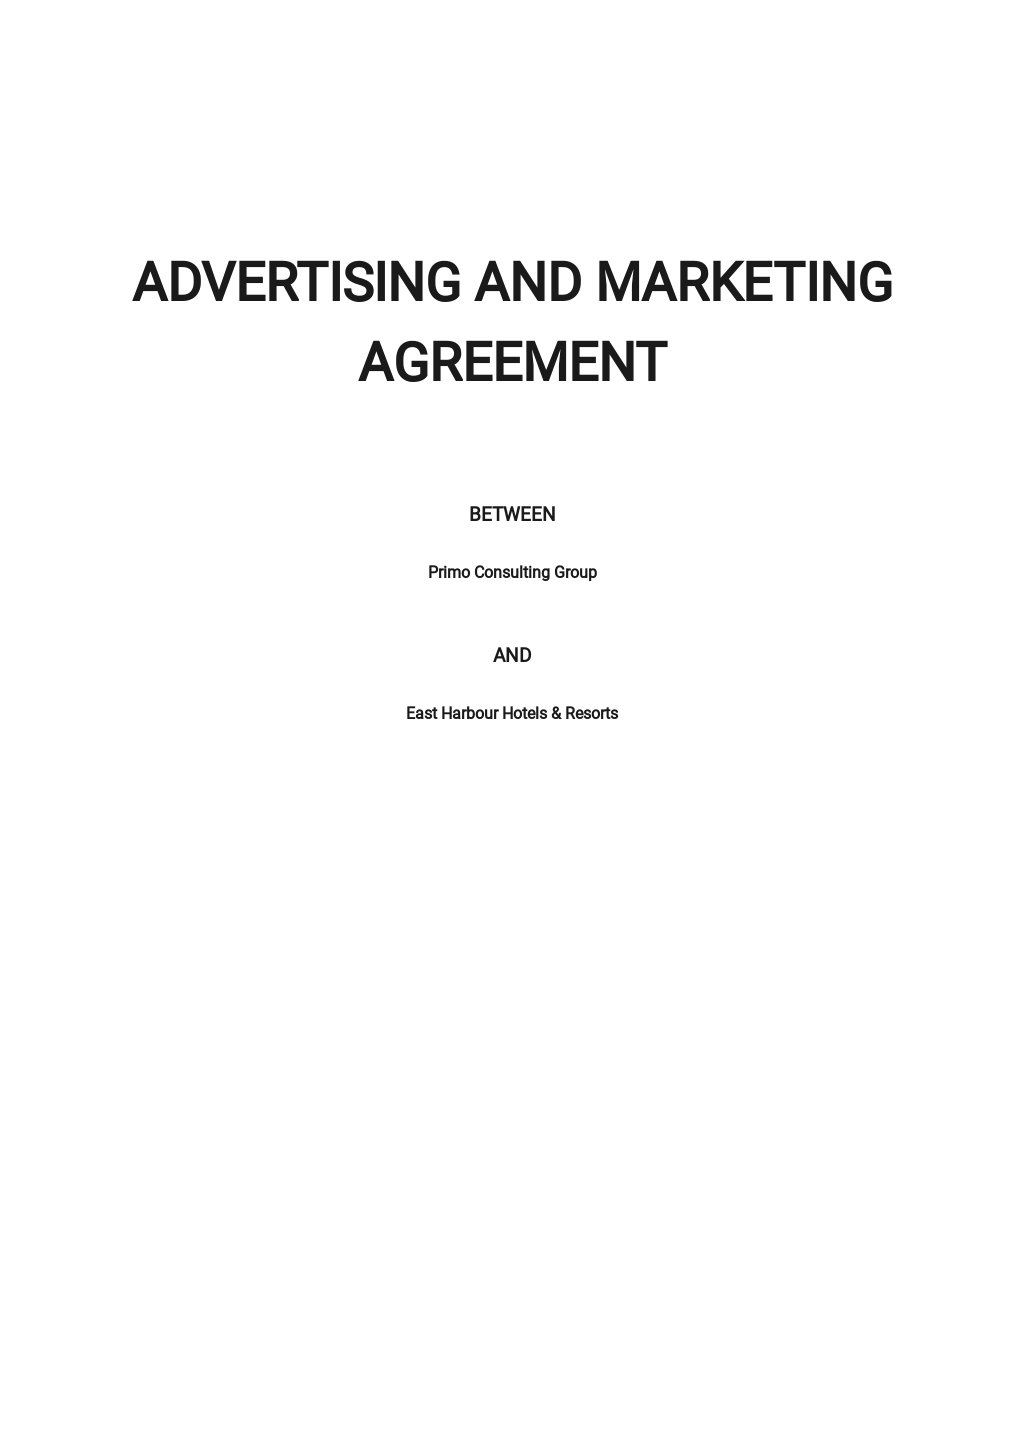 Advertising and Marketing Agreement Template.jpe